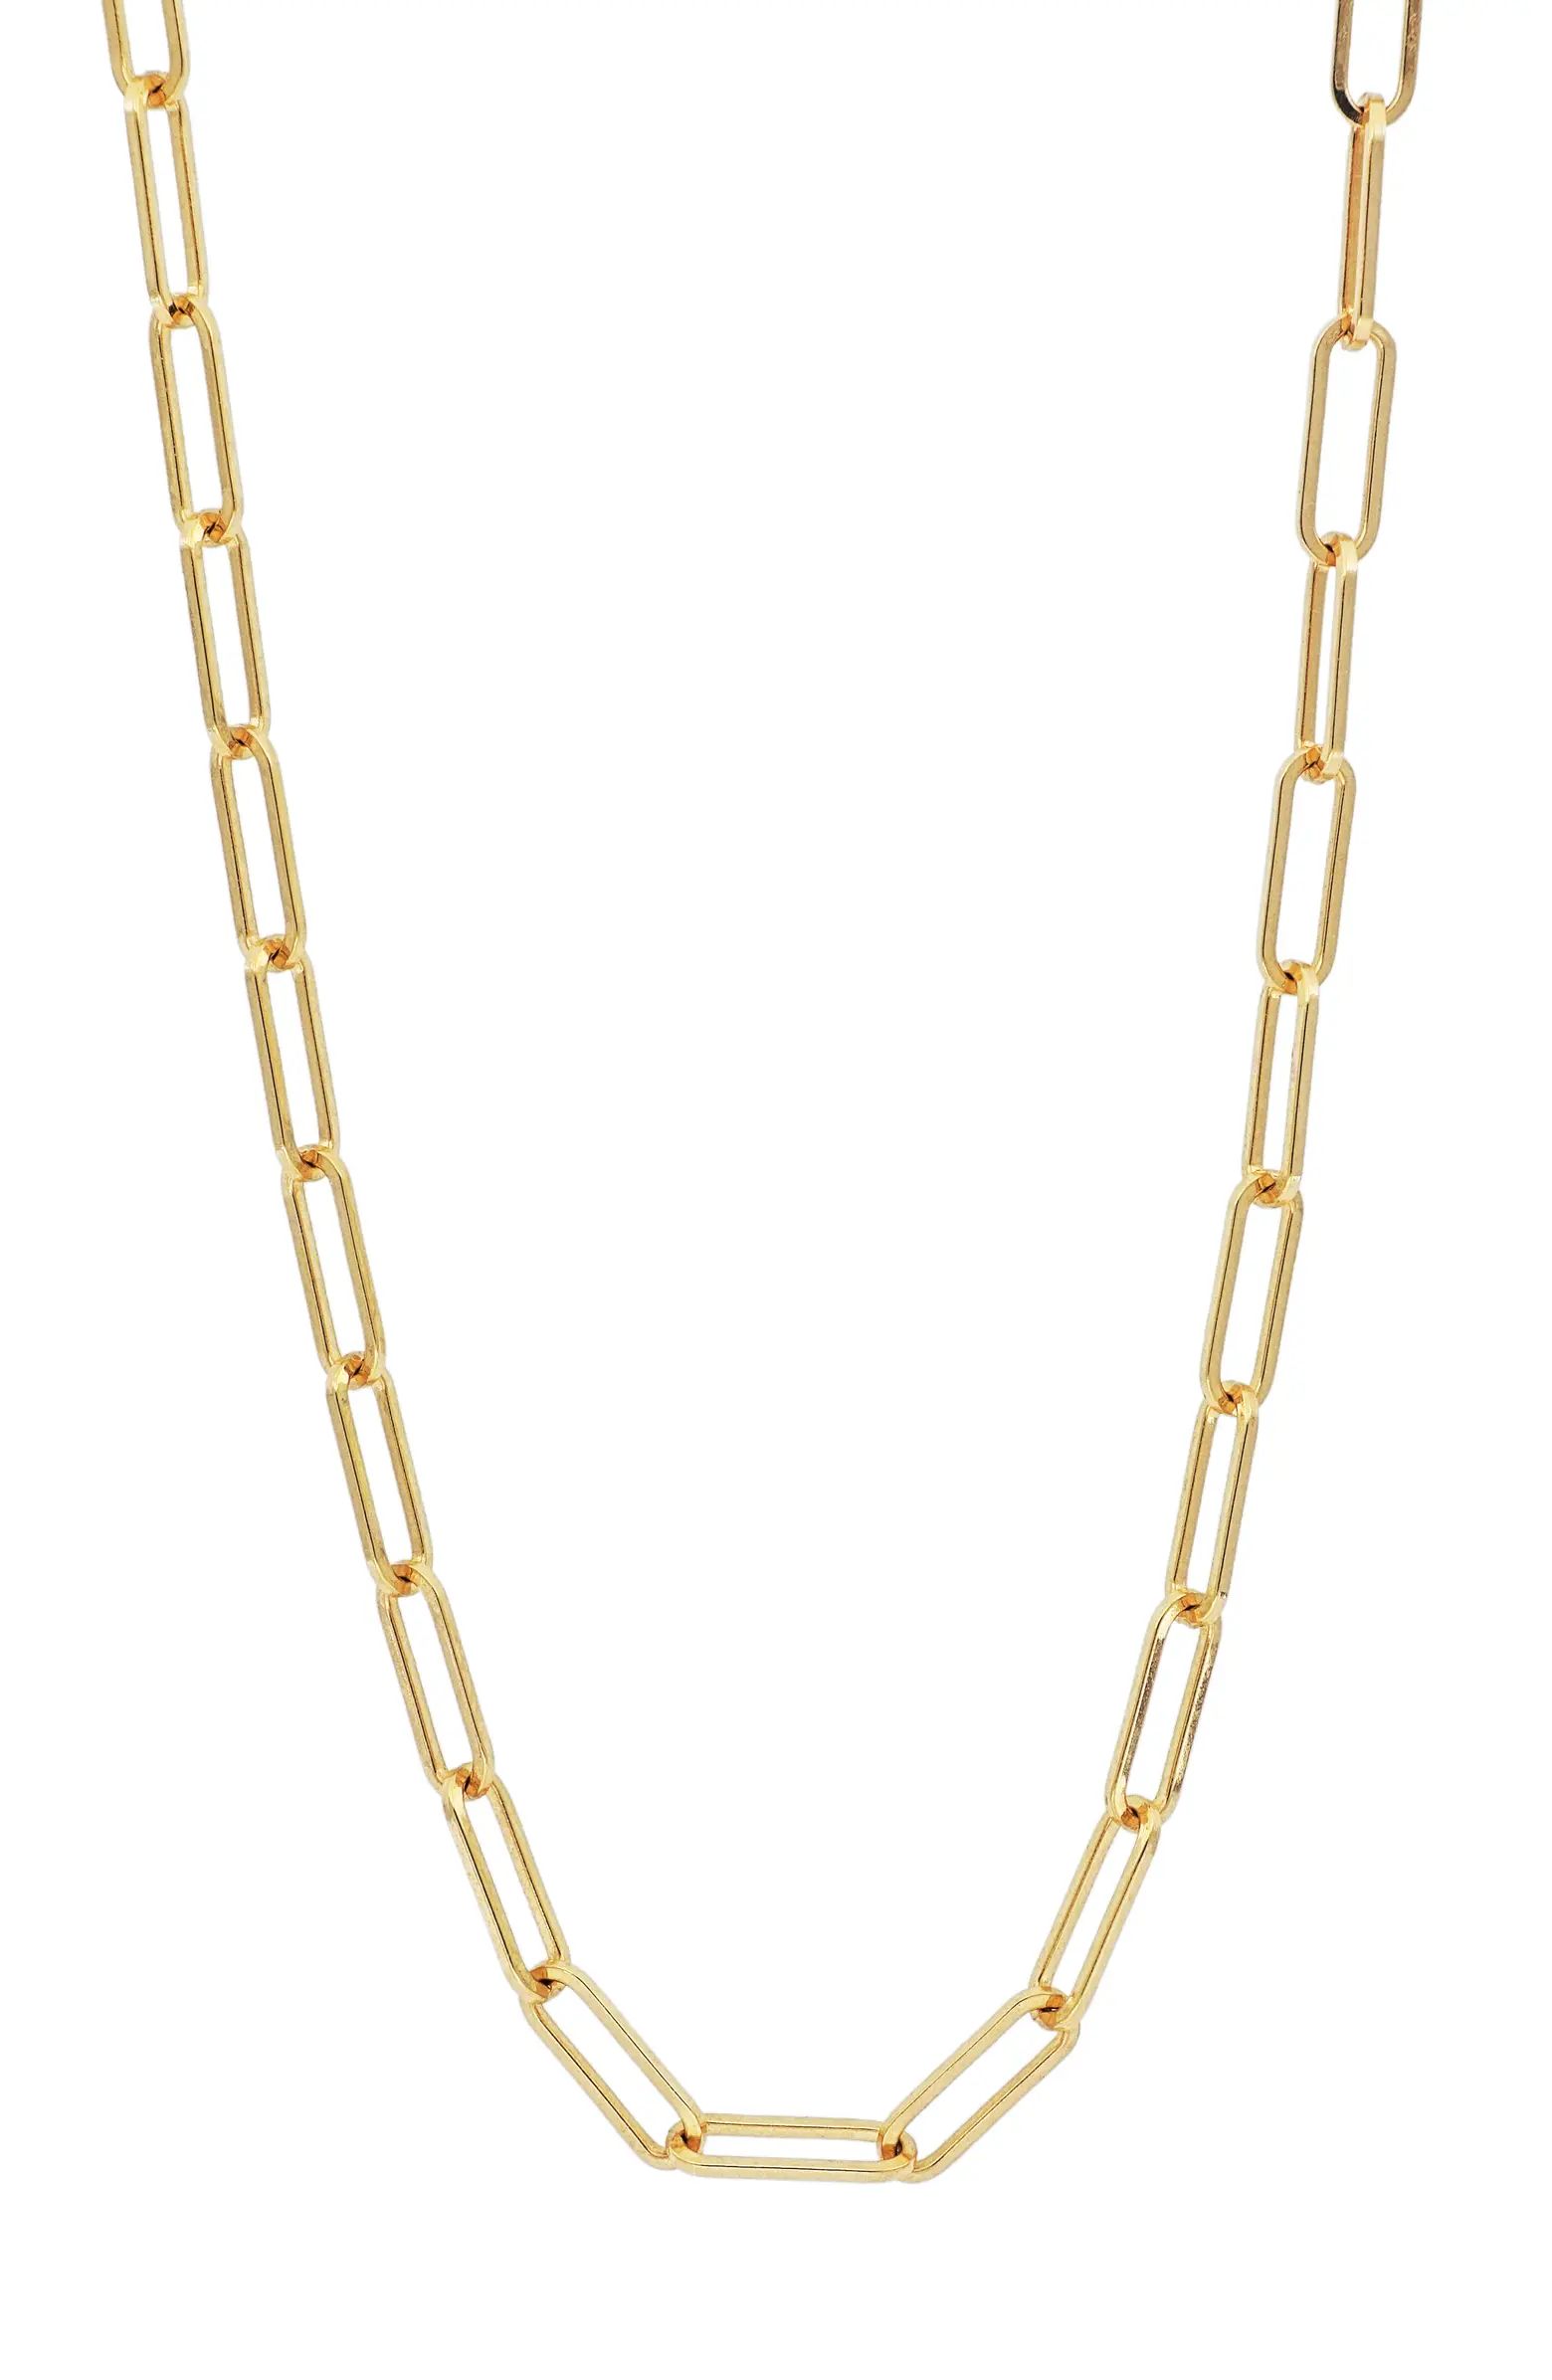 Ofira 14K Gold Chain Link Necklace | Nordstrom